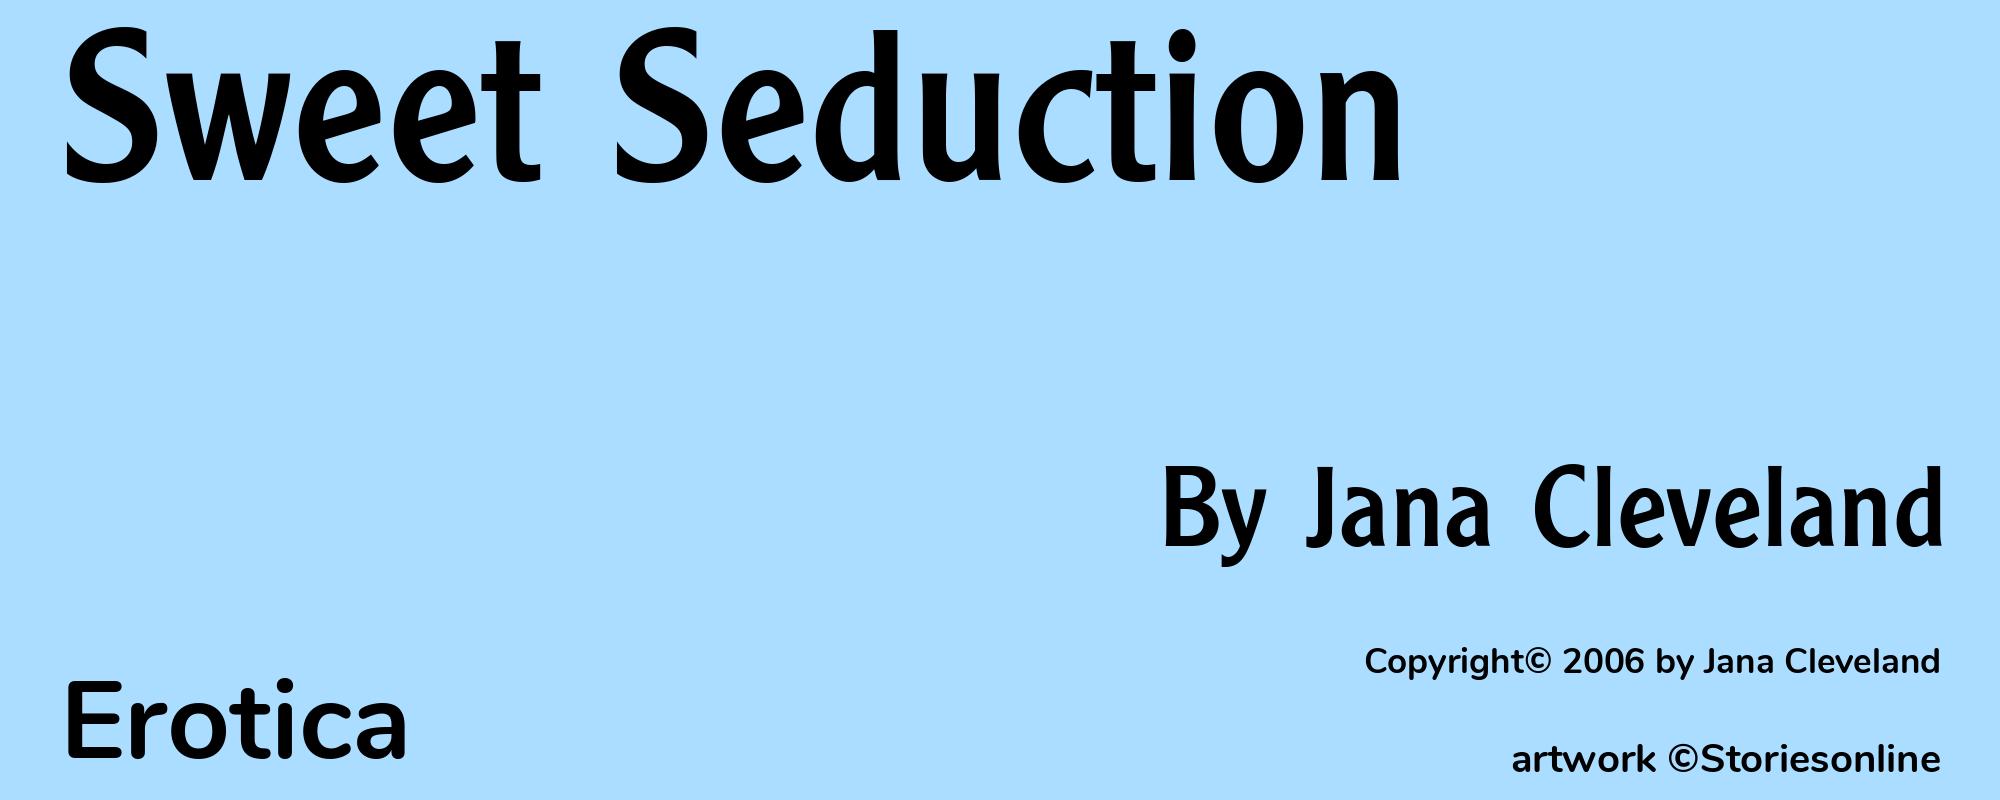 Sweet Seduction - Cover